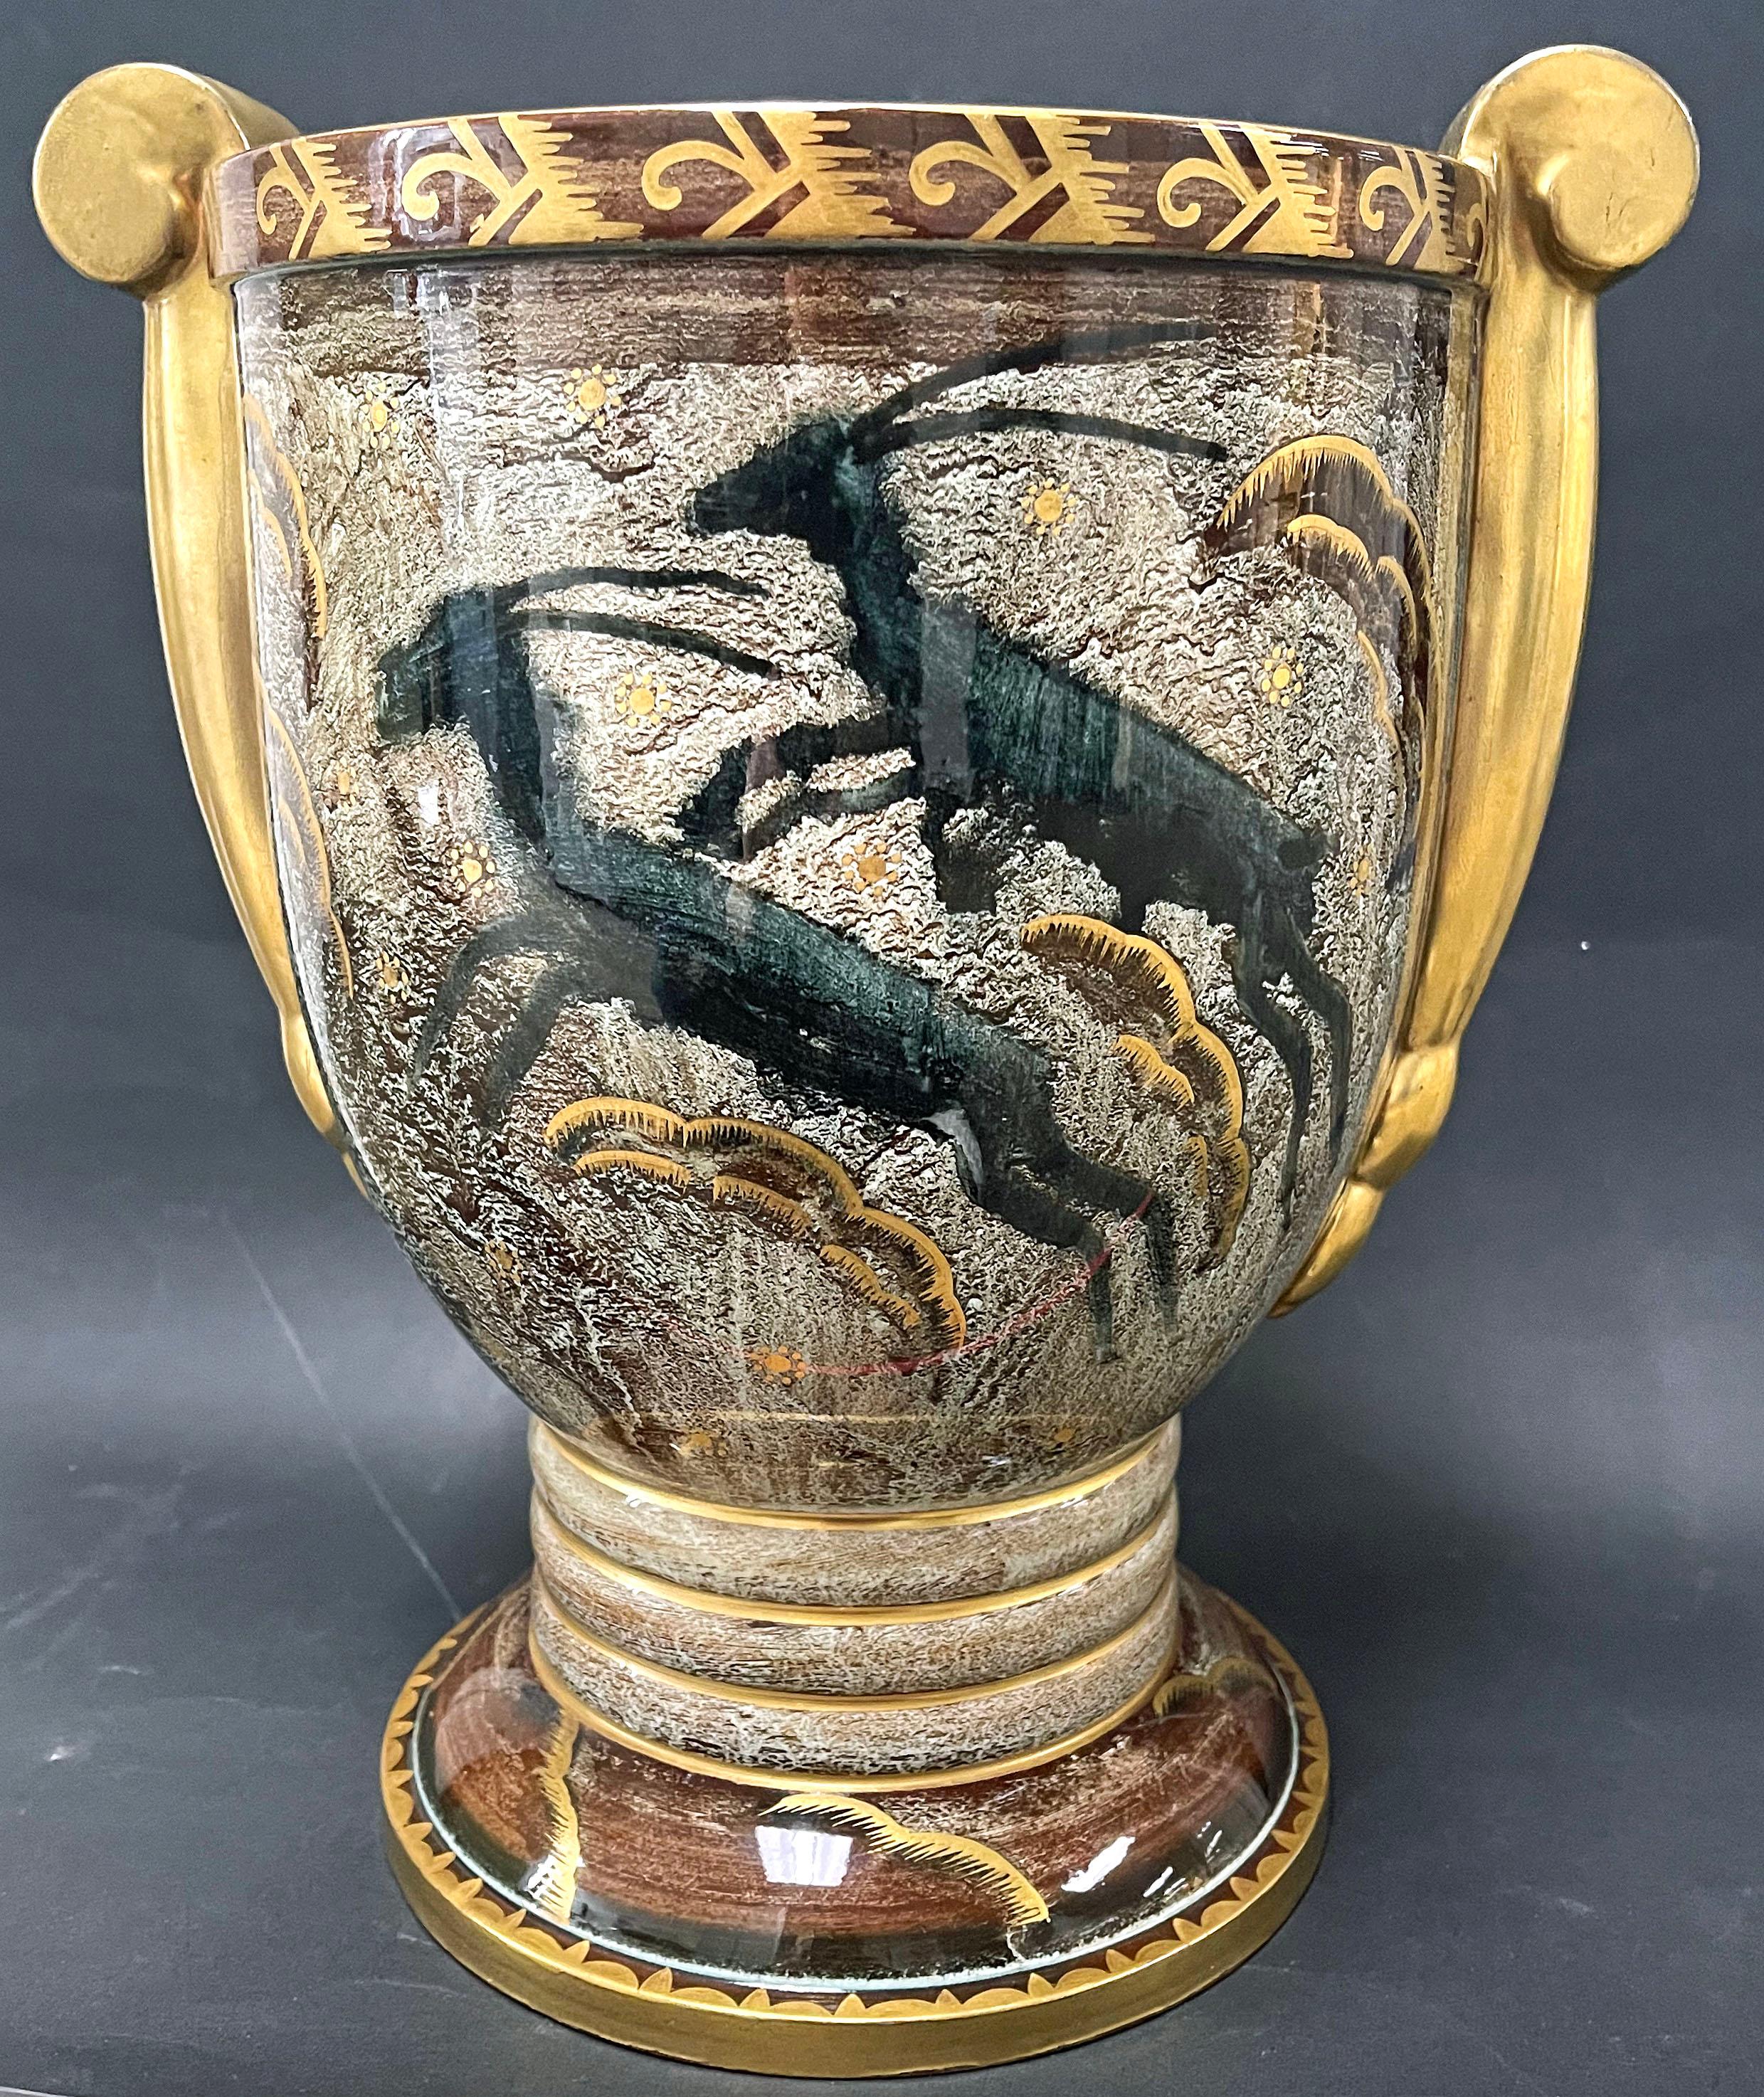 This very early example of Art Deco artisanry, dating from around 1917 just before Josef Ekberg left the Gustavsberg porcelain works in Sweden, is richly decorated with leaping gazelles accompanied by stylized clouds of gold superimposed over a